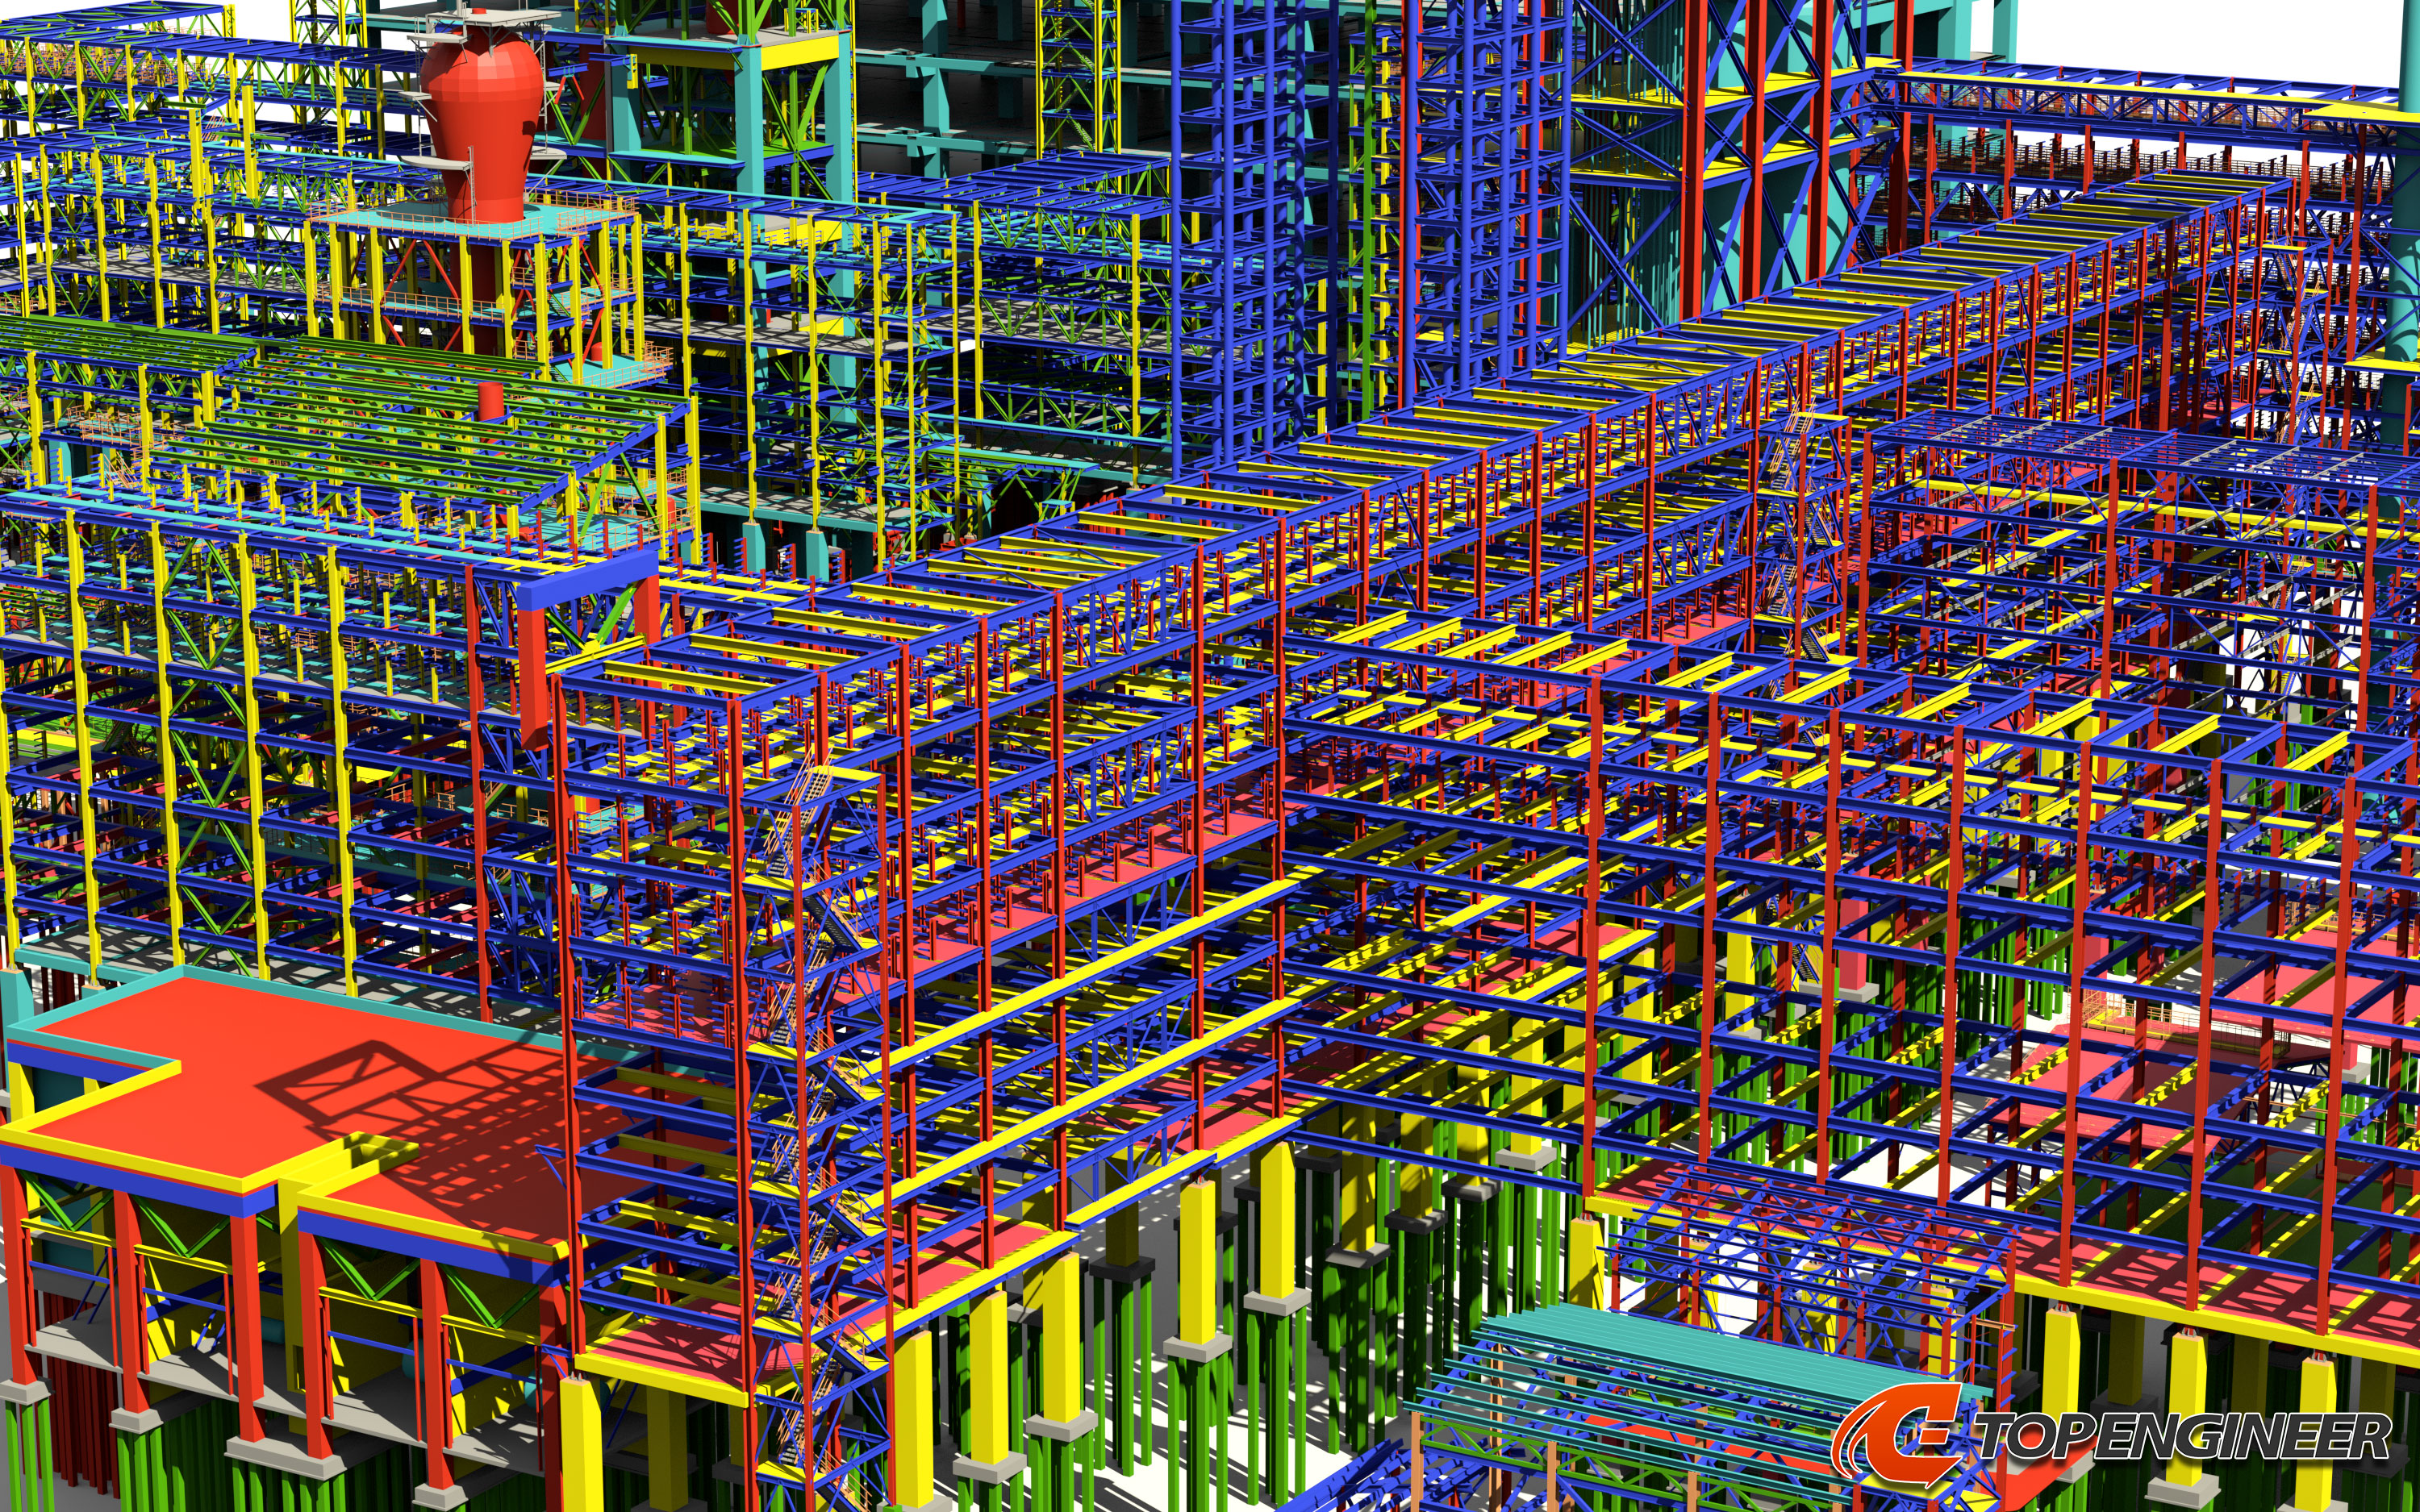 Bim (building information model) for gas processing factory in tekla structures